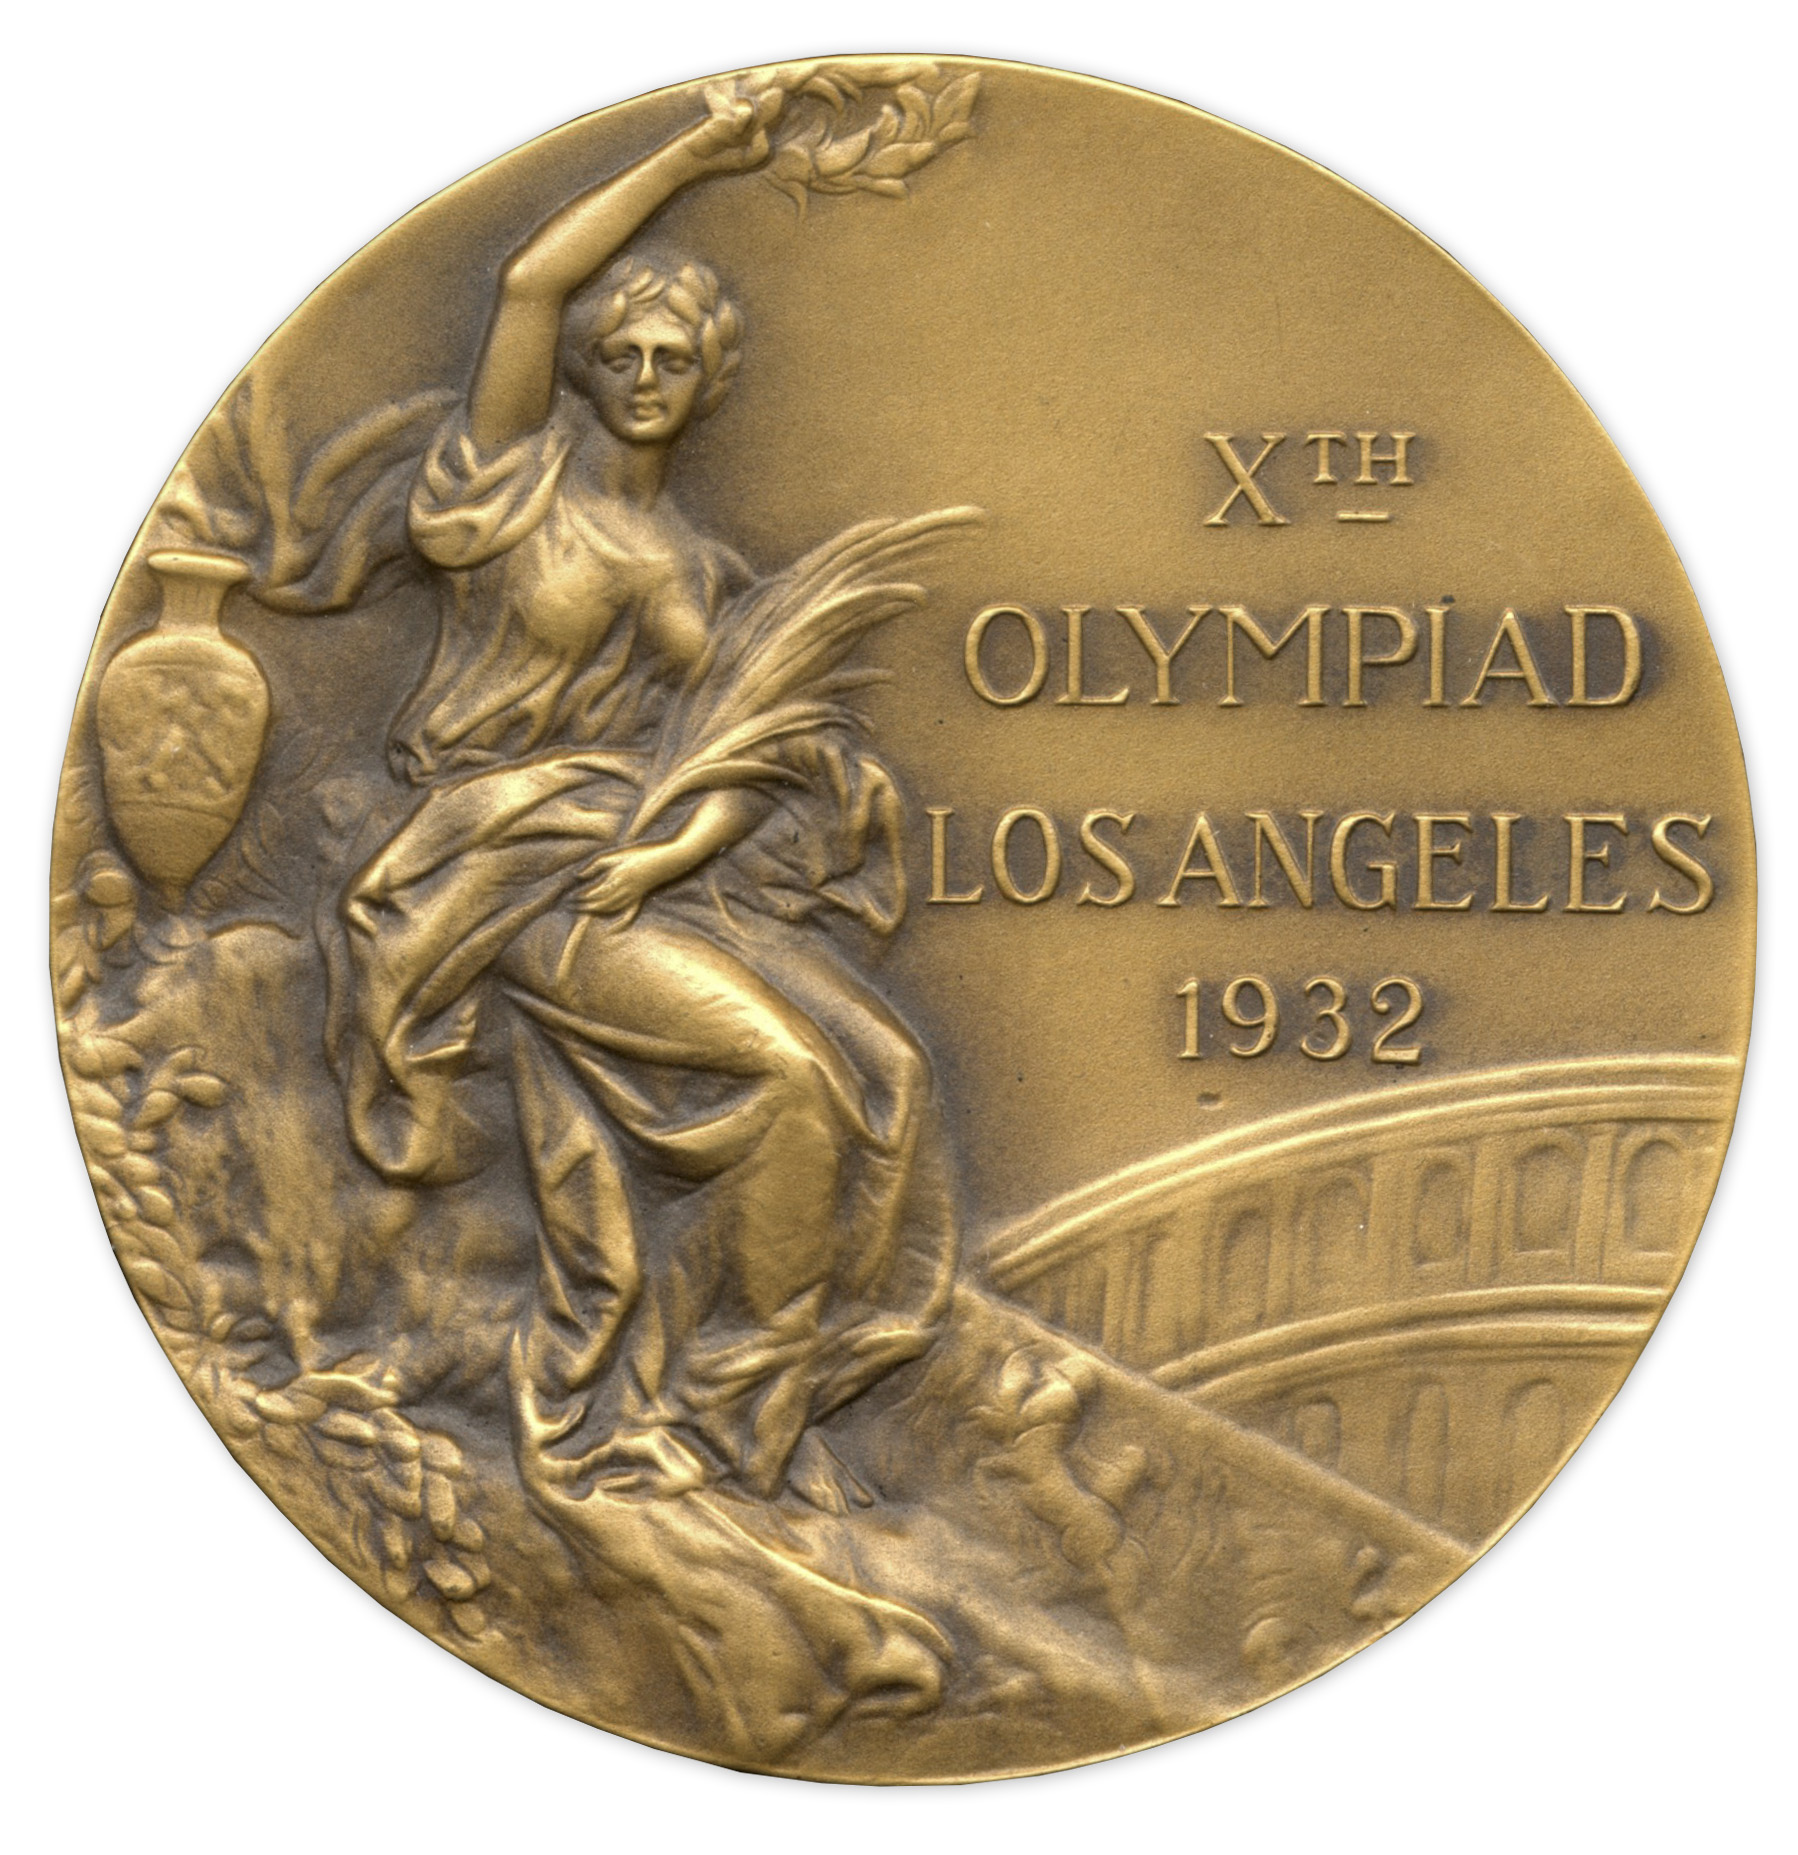 Bronze Olympic Medal From the 1932 Summer Olympics, Held in Los Angeles, CaliforniaAll > Olympics